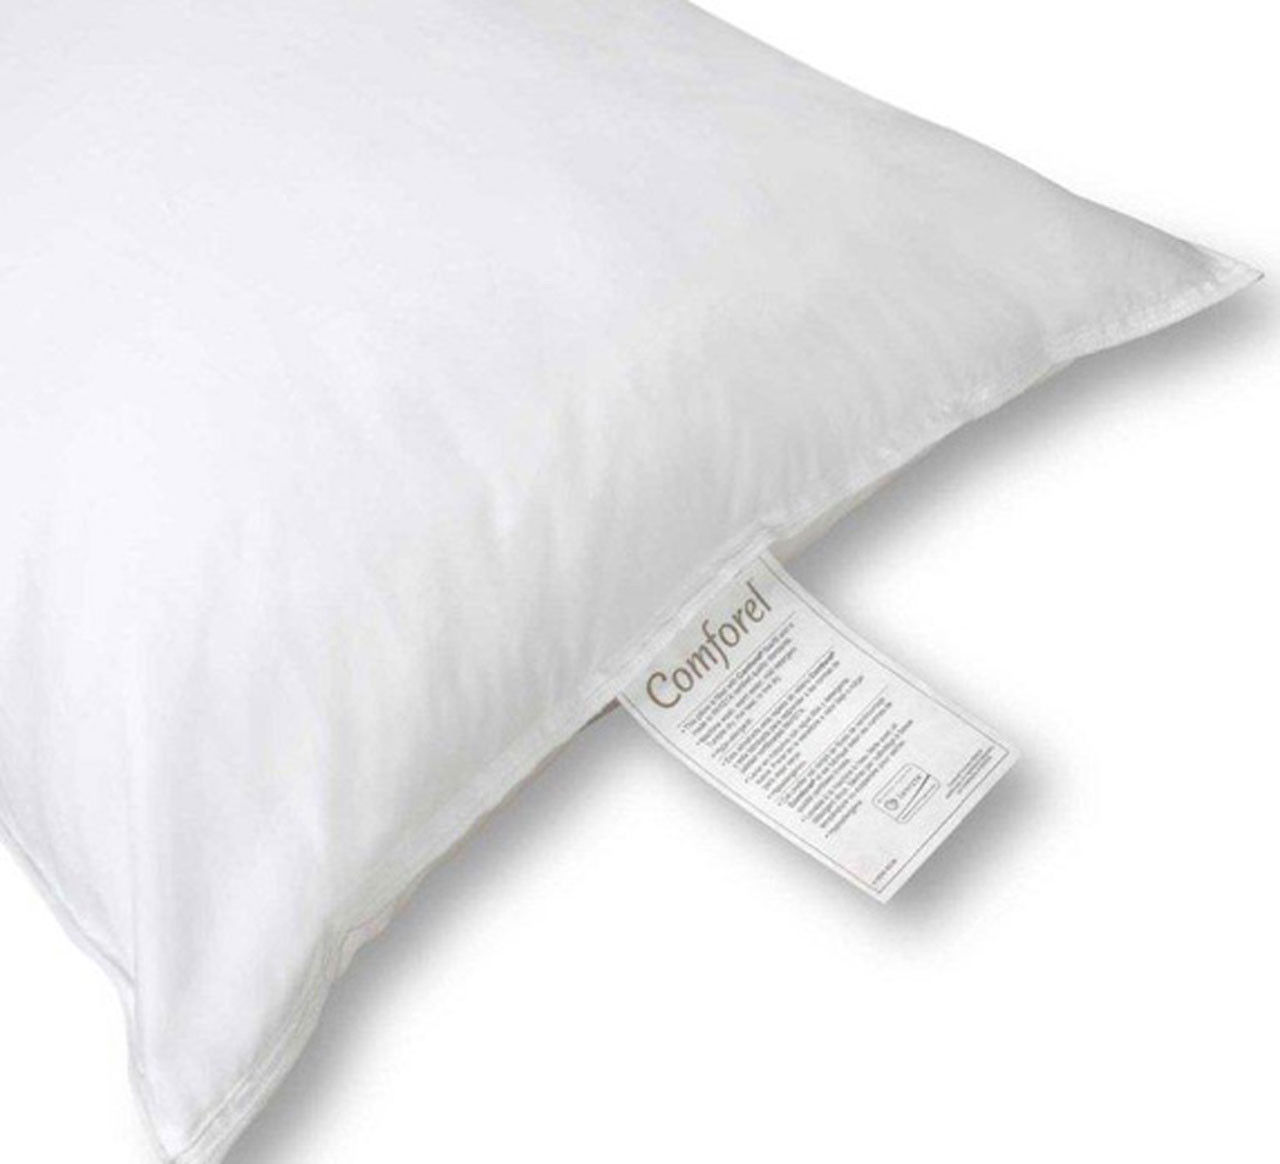 What are the available sizes of Comforel® pillows?